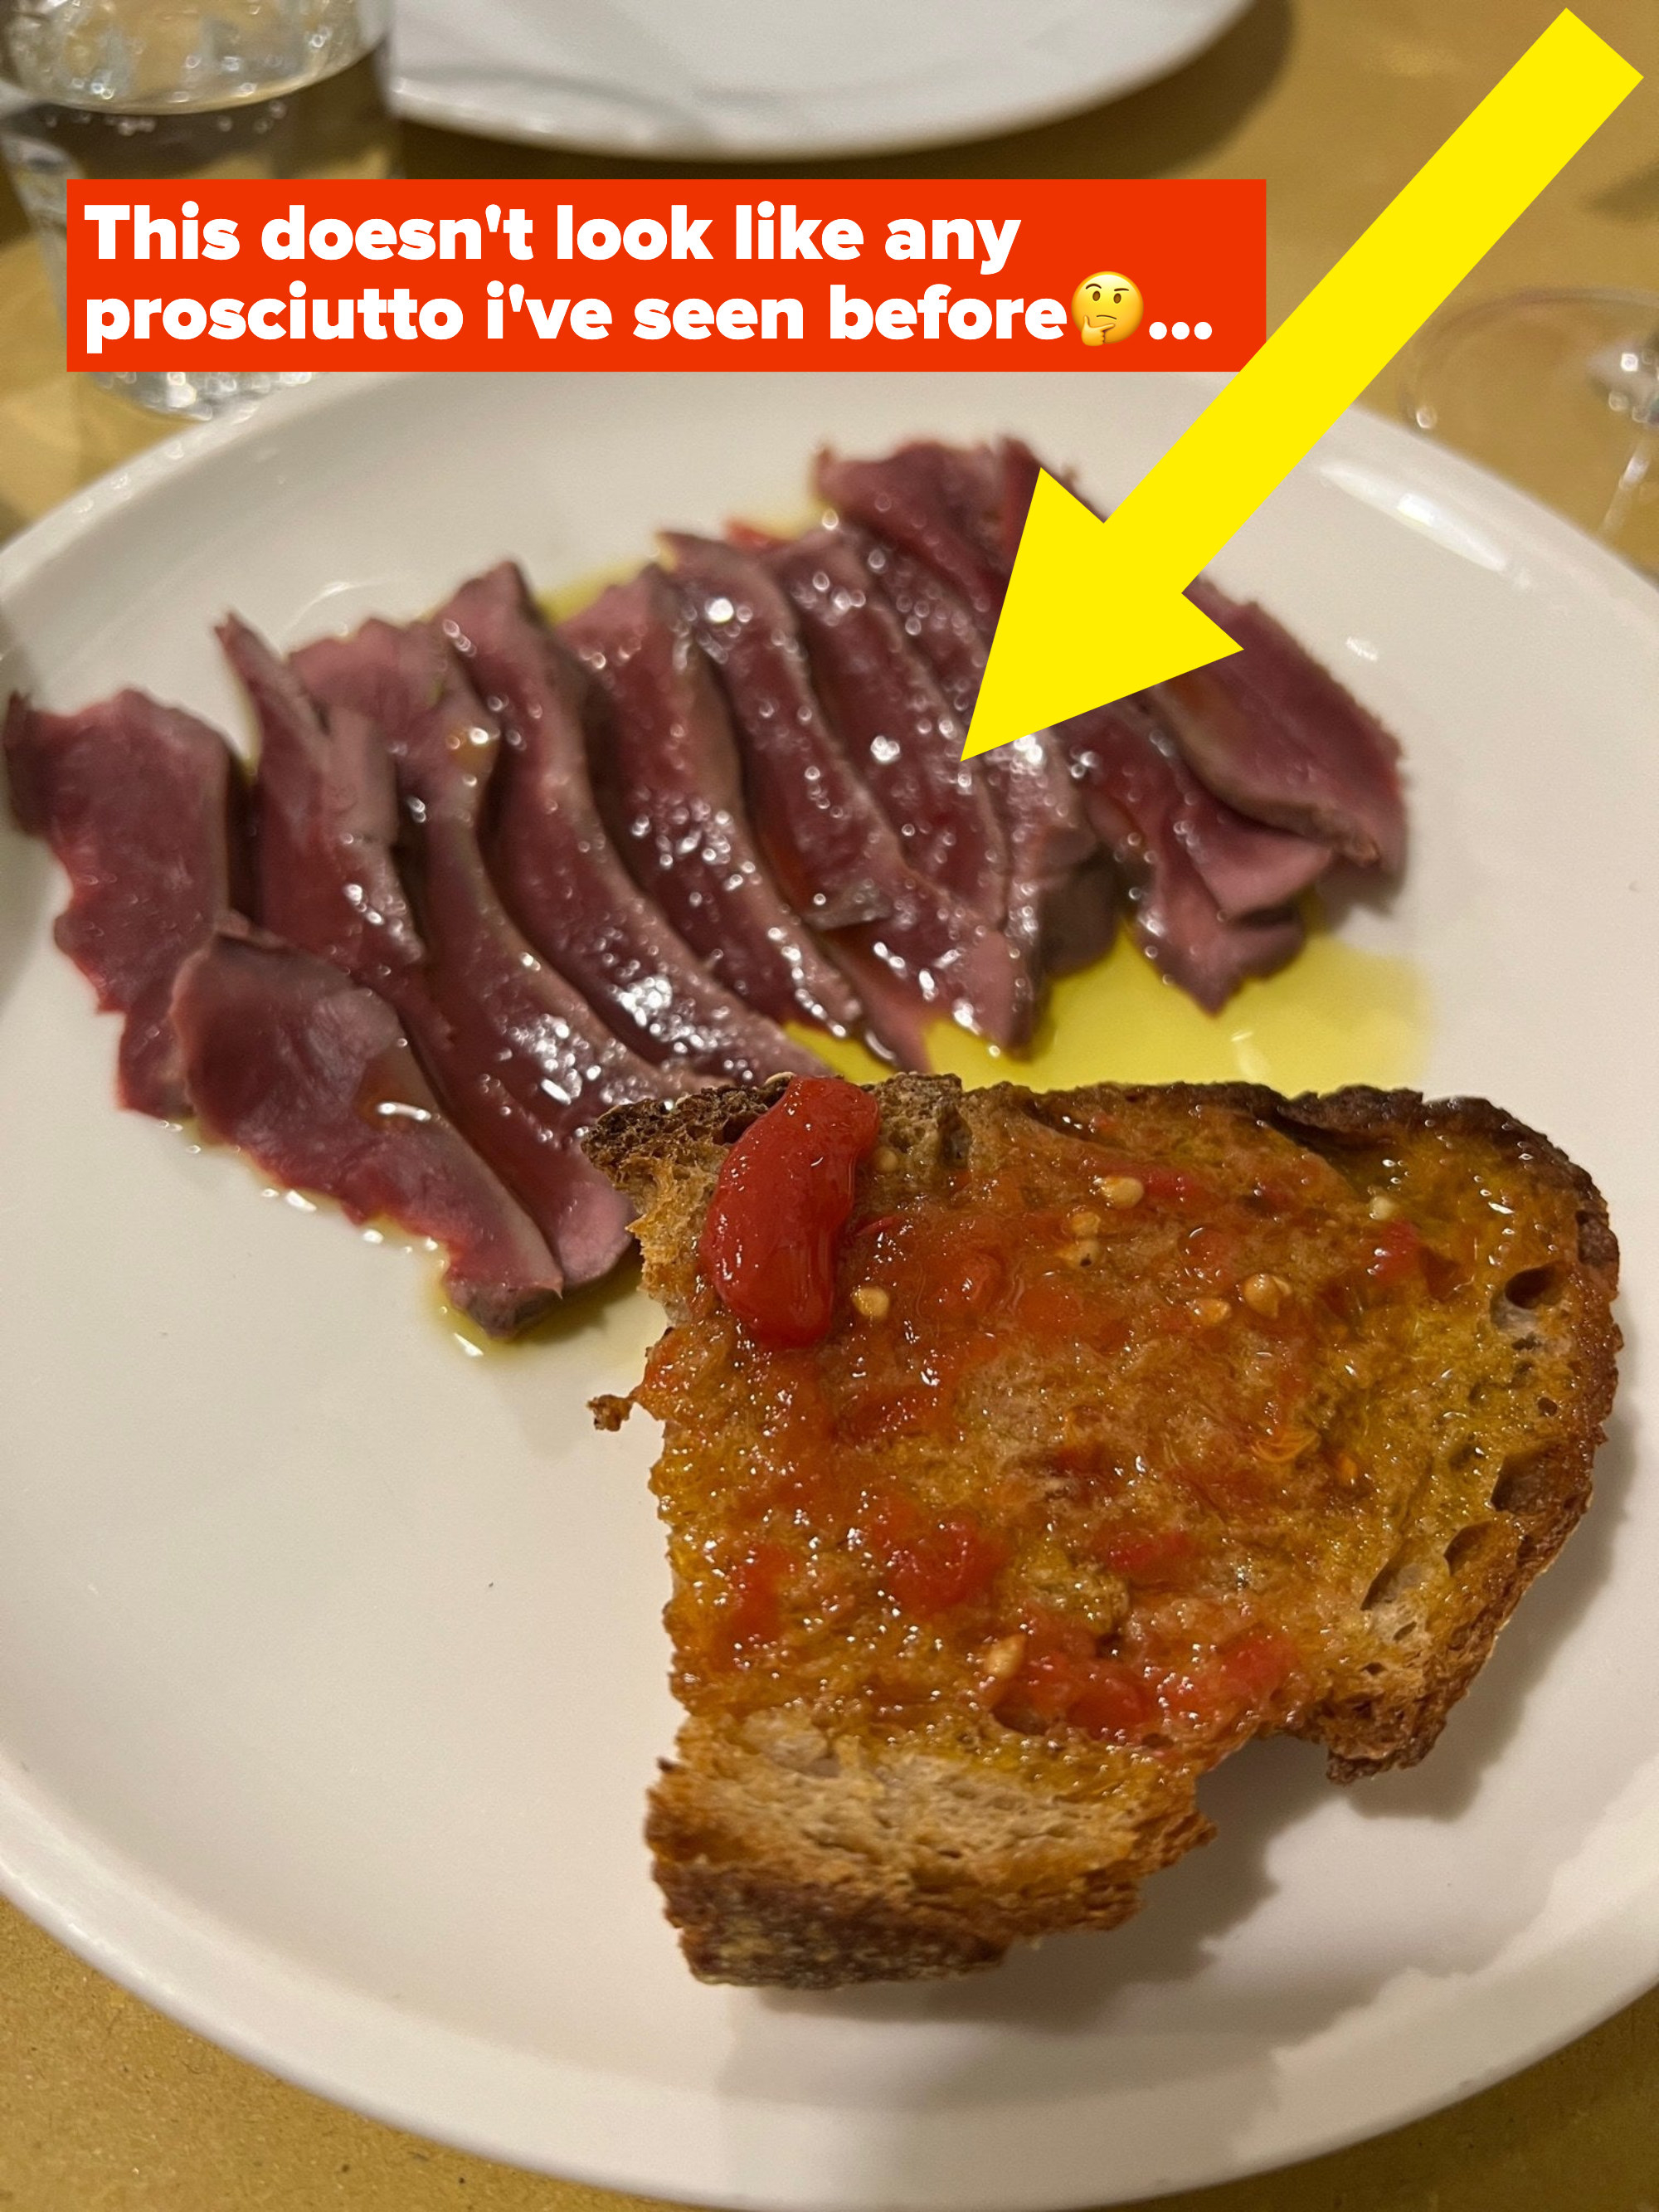 A plate with a slice of bread and cured meat.